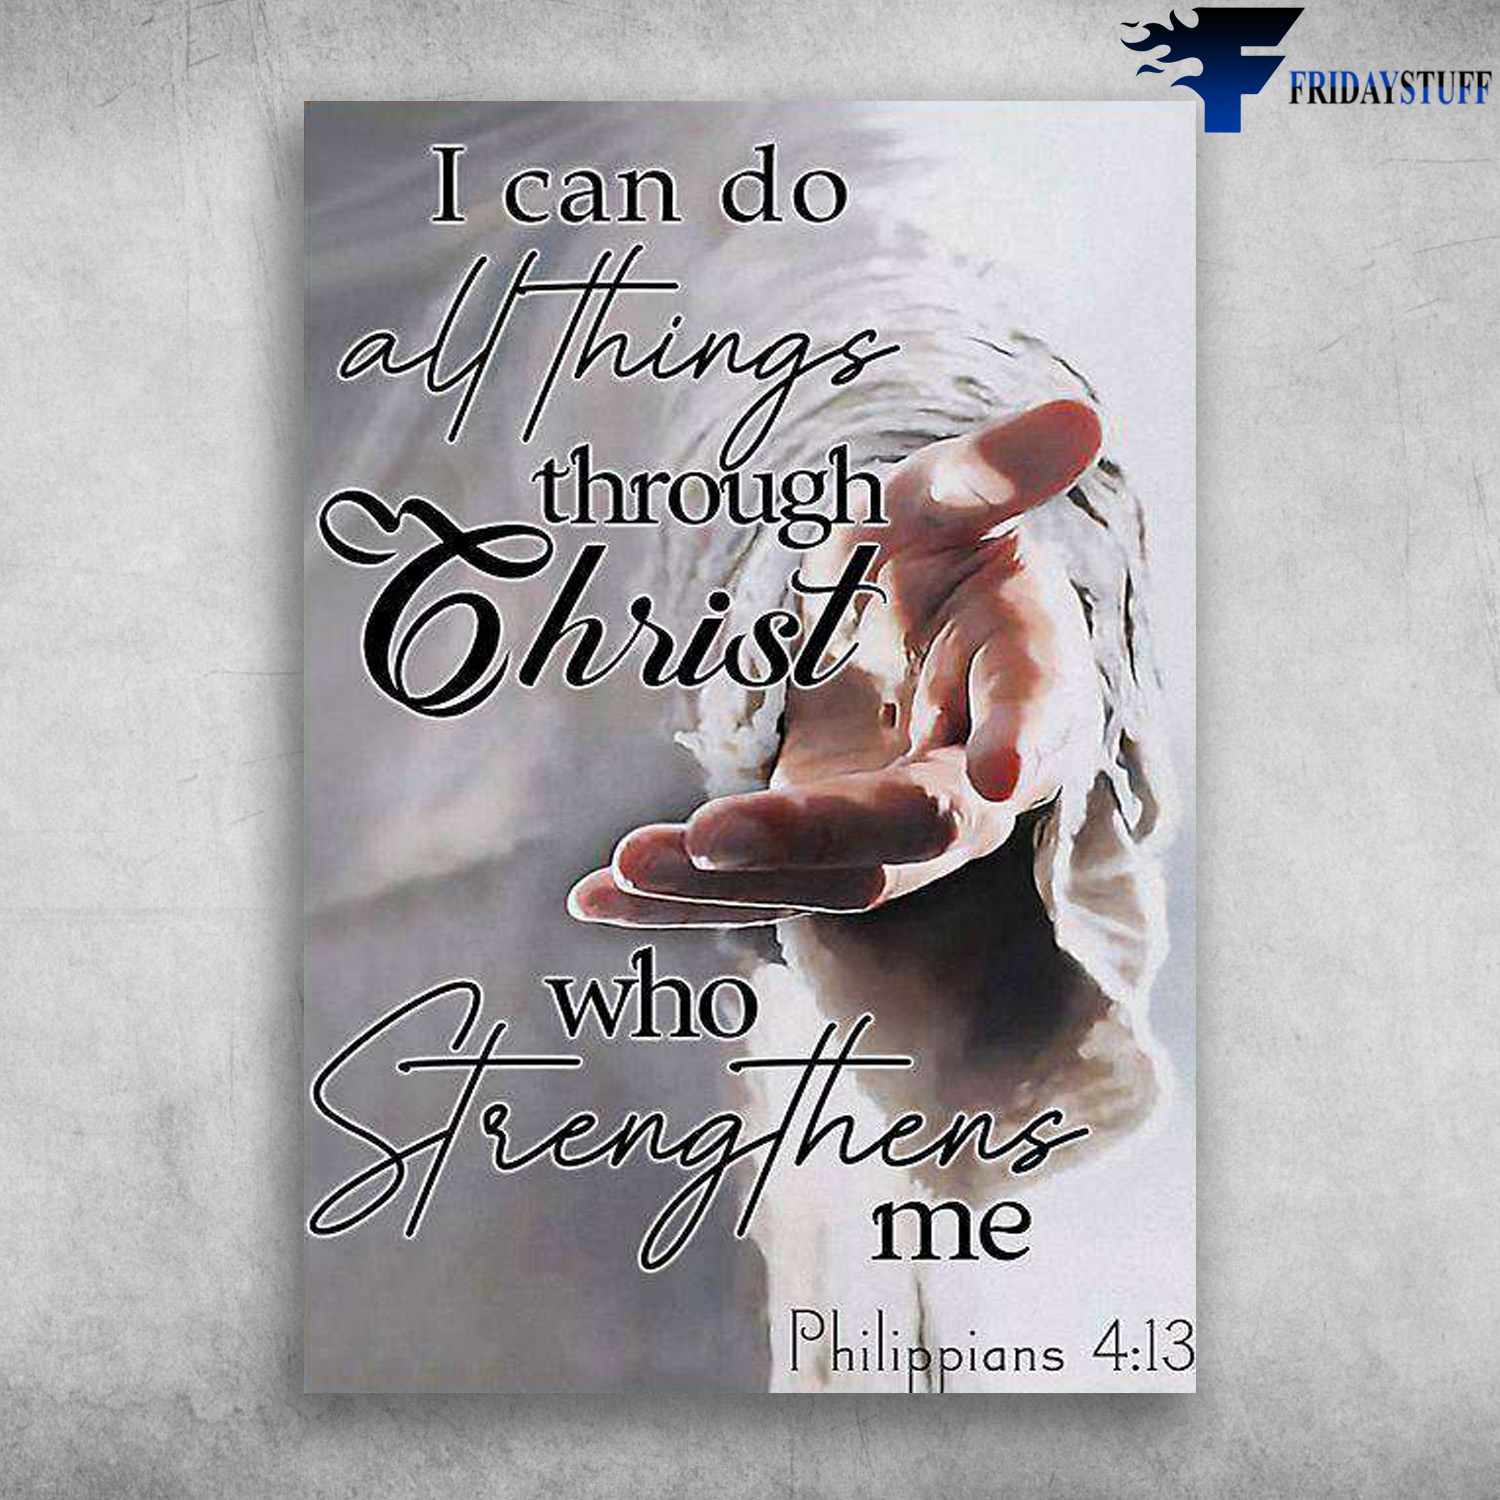 Jesus's Hands - I Can Do All Things, Through Christ, Who Strengthens Me